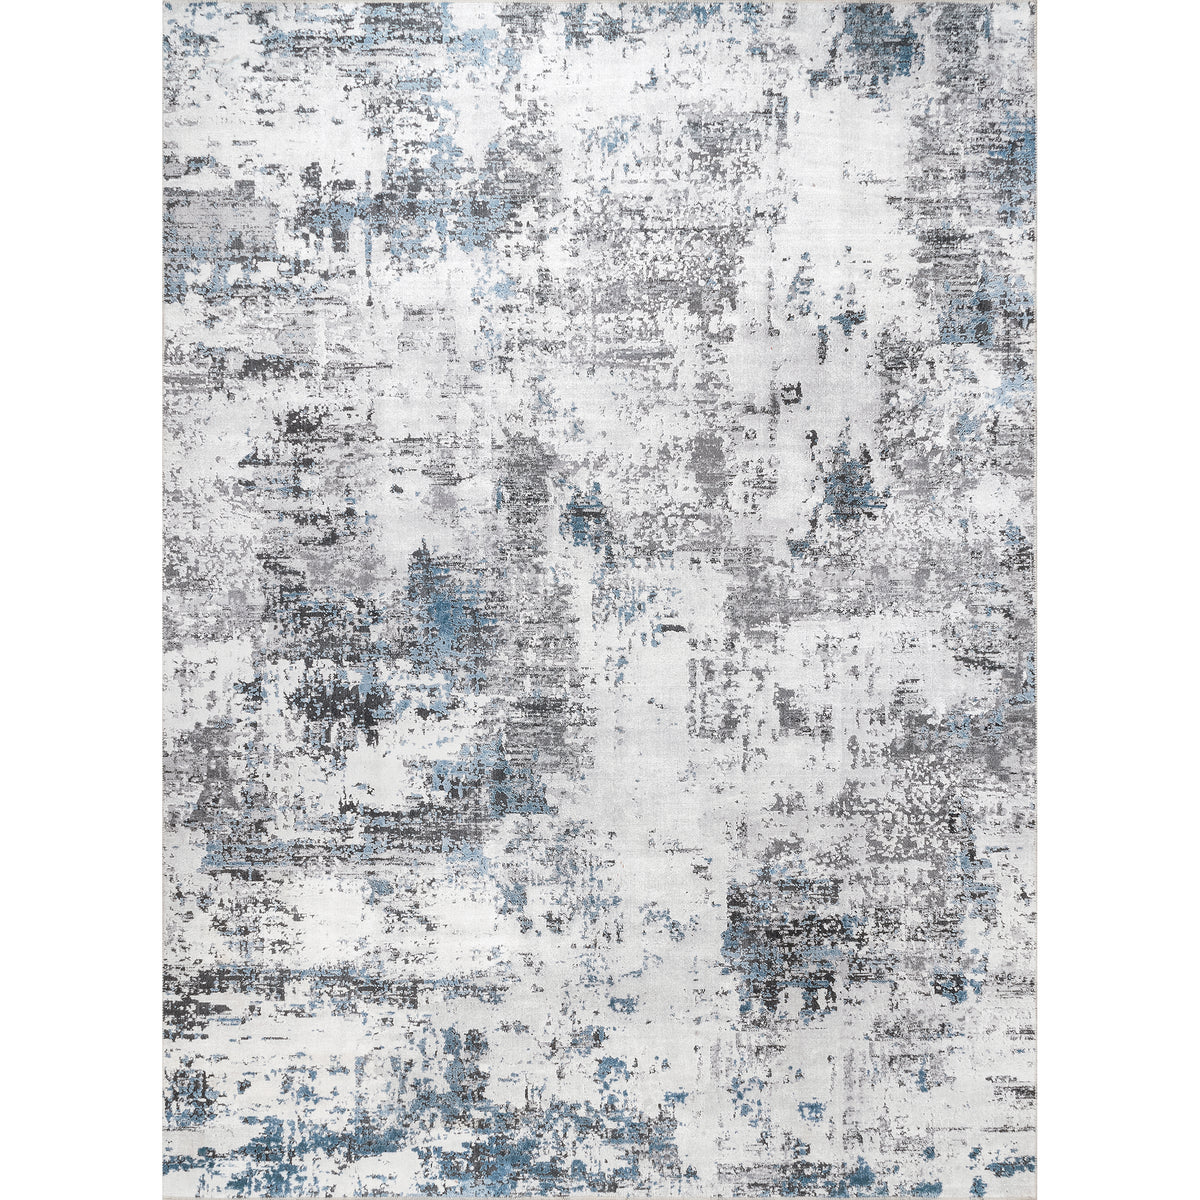 nuLOOM 9 x 12 Rectangular Recycled Synthetic Fiber Non-Slip Rug